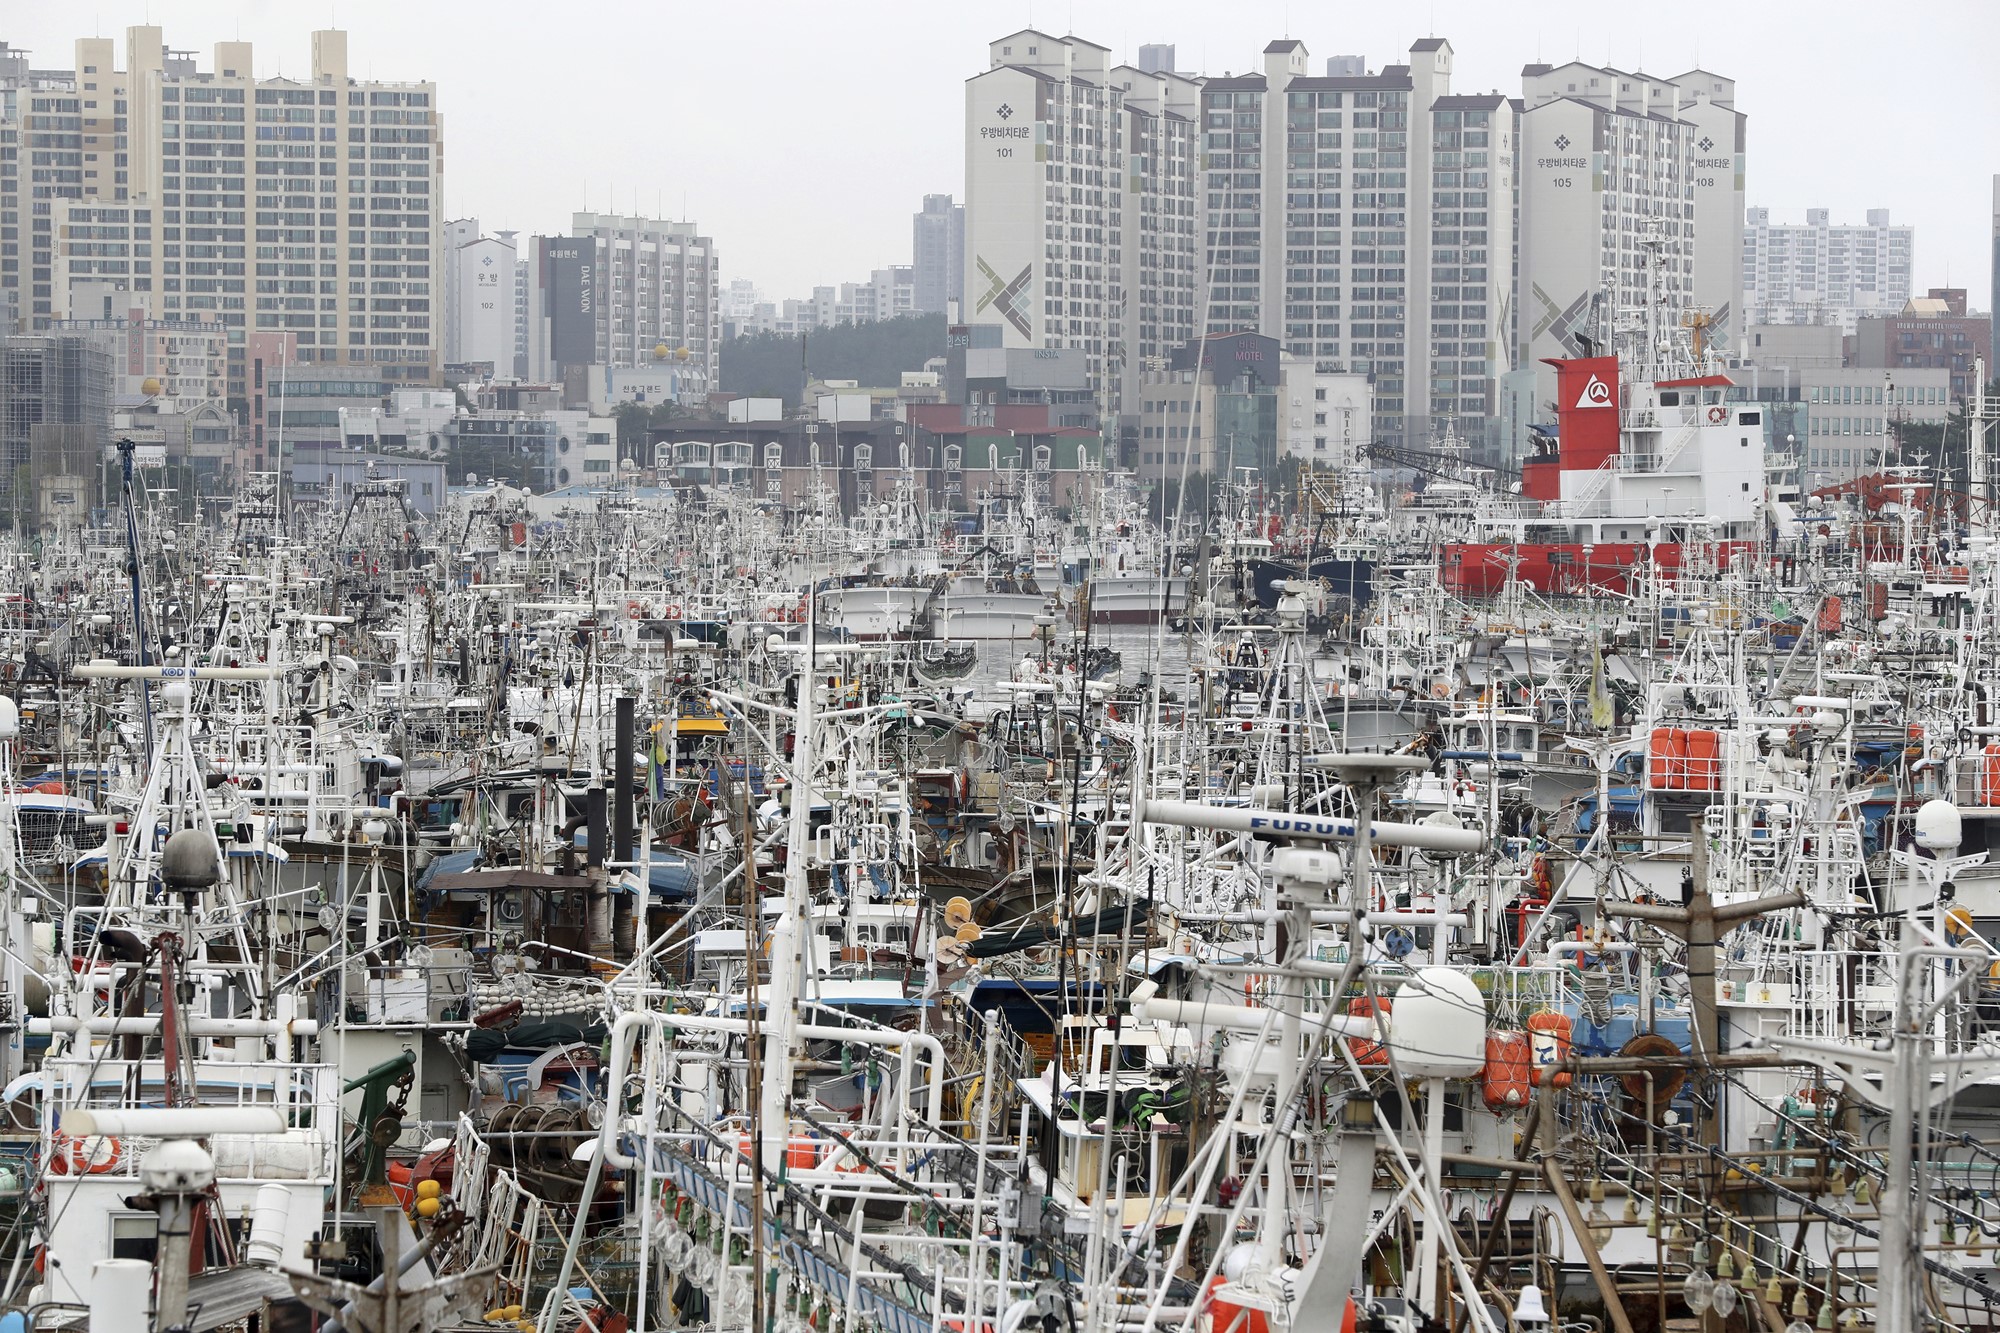 Hundreds of boats are anchored at a port.